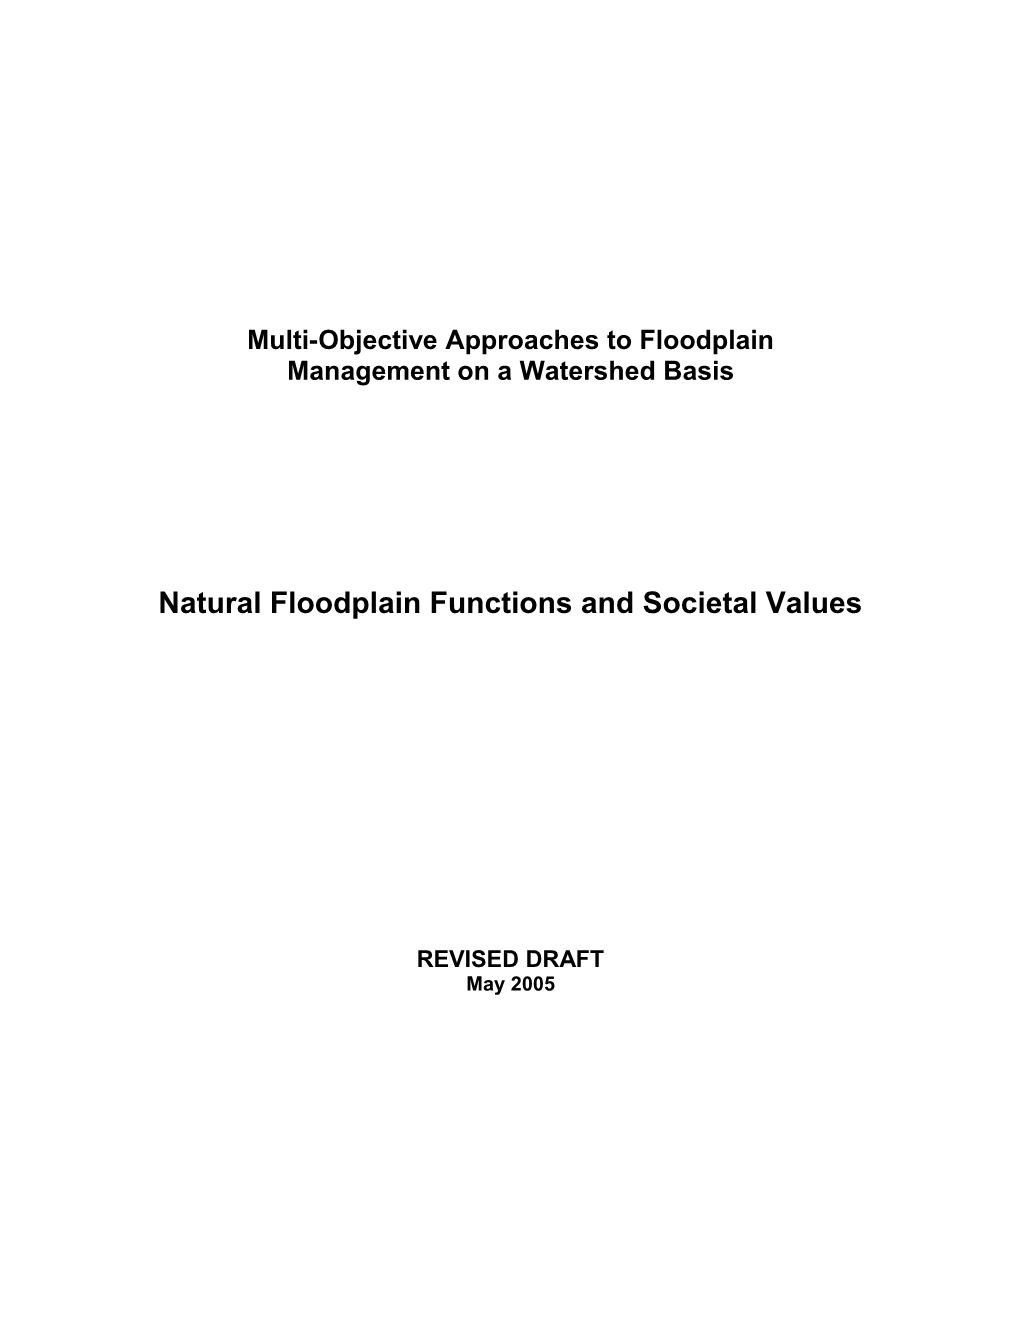 Multi-Objective Approaches to Floodplain Management